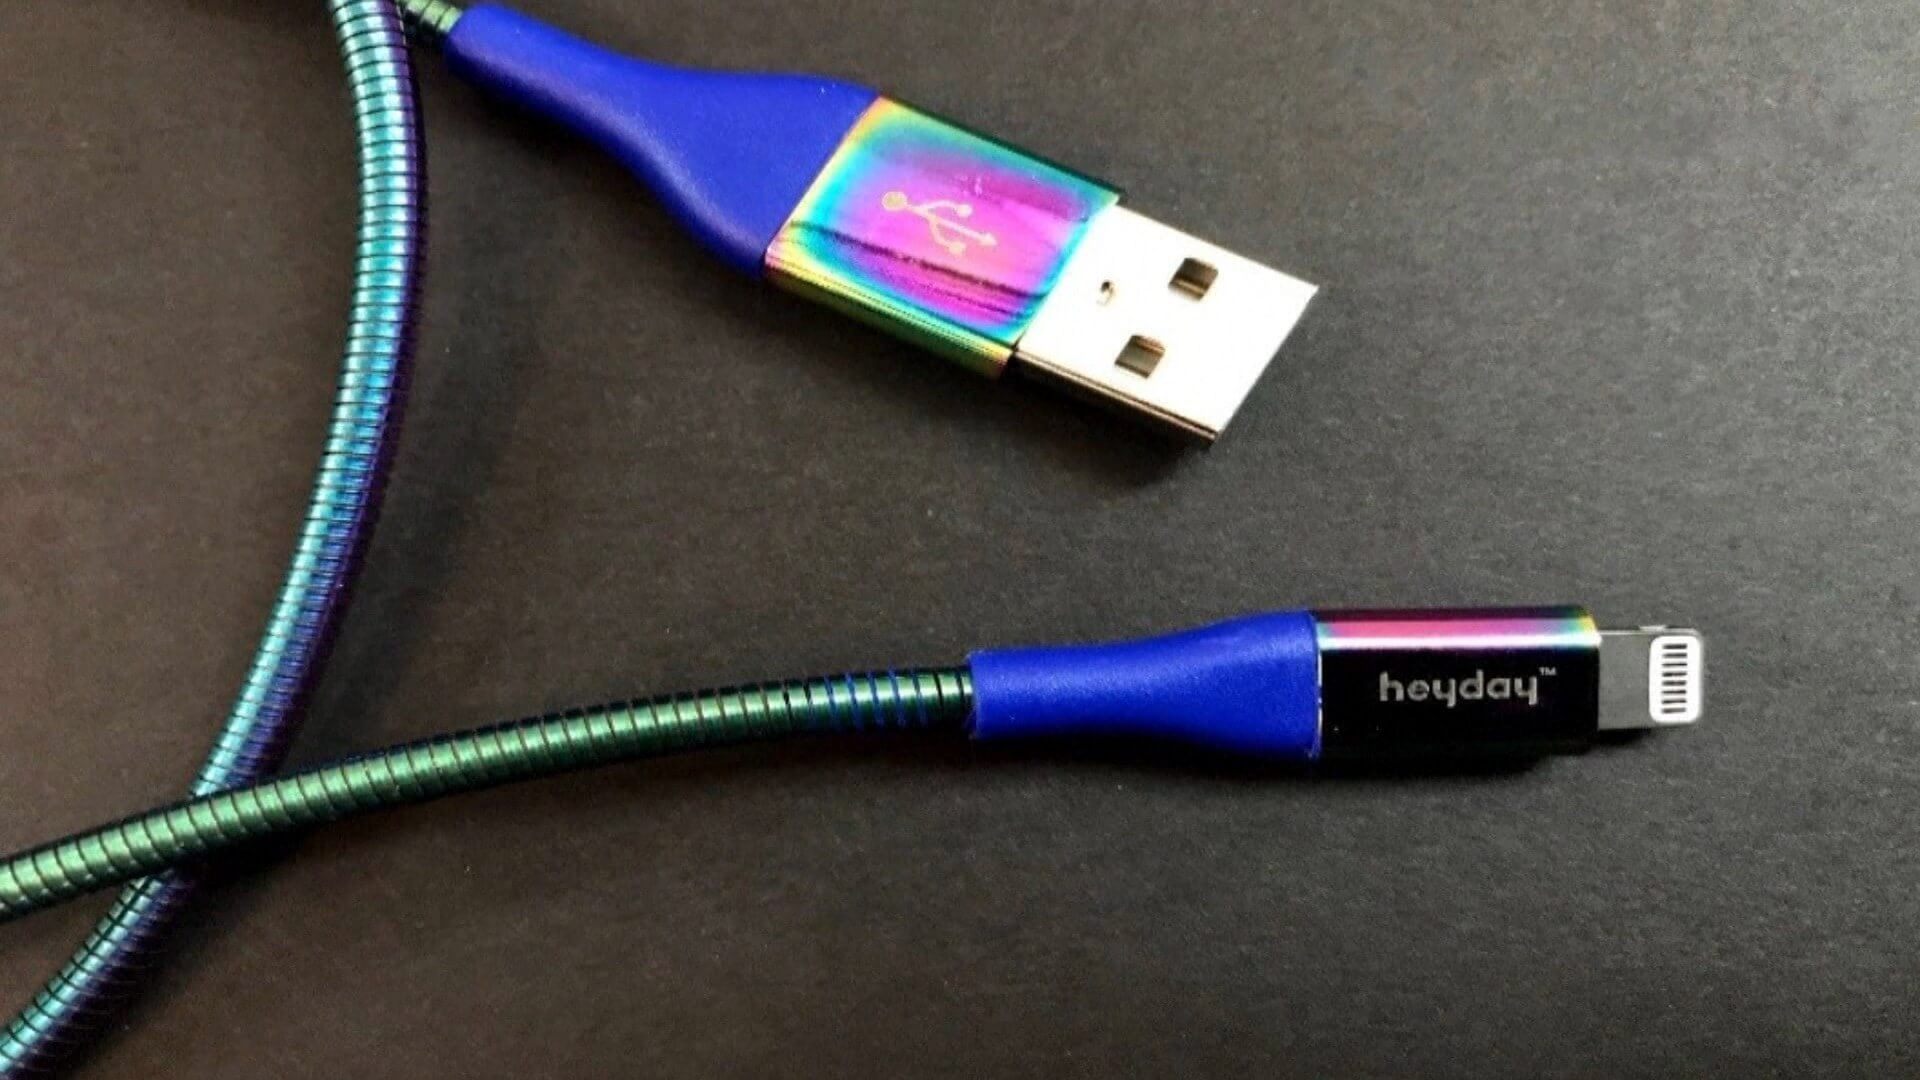 Target recalls store-branded Lightning cables due to fire and shock hazards